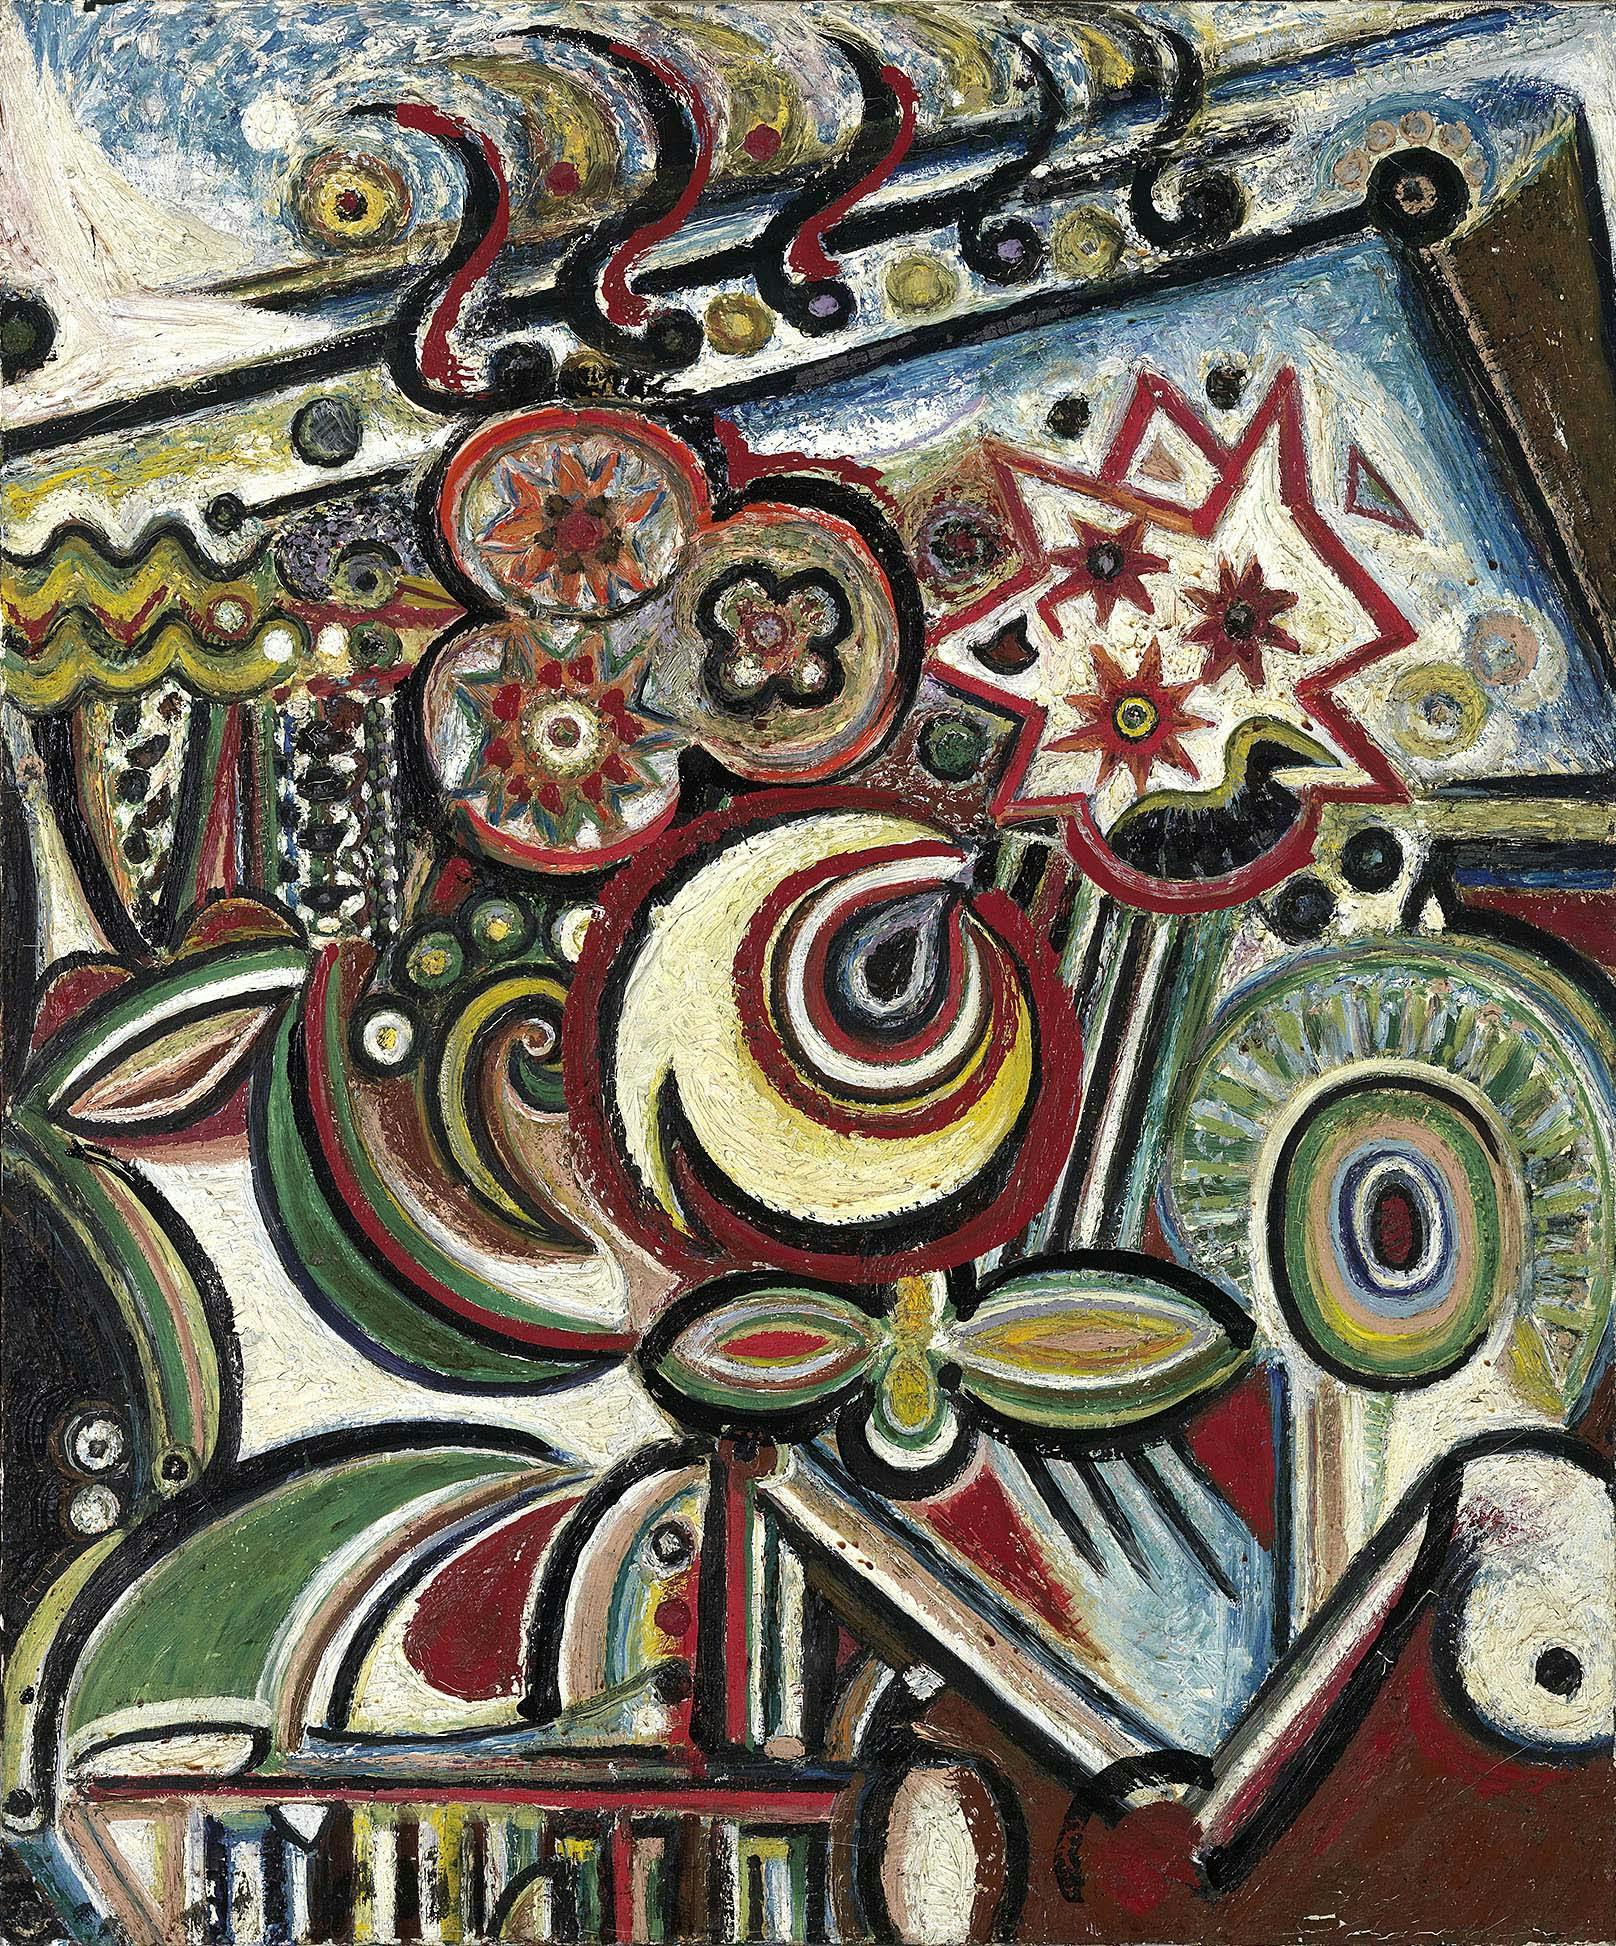 Play of Fire
1944
Oil on canvas
36 1/4 x 30 in. (92.1 x 76.2 cm)
Smith College Museum of Art, Northampton, MA, Gift of Jonathan Marshall (1955:17)
 – The Richard Pousette-Dart Foundation